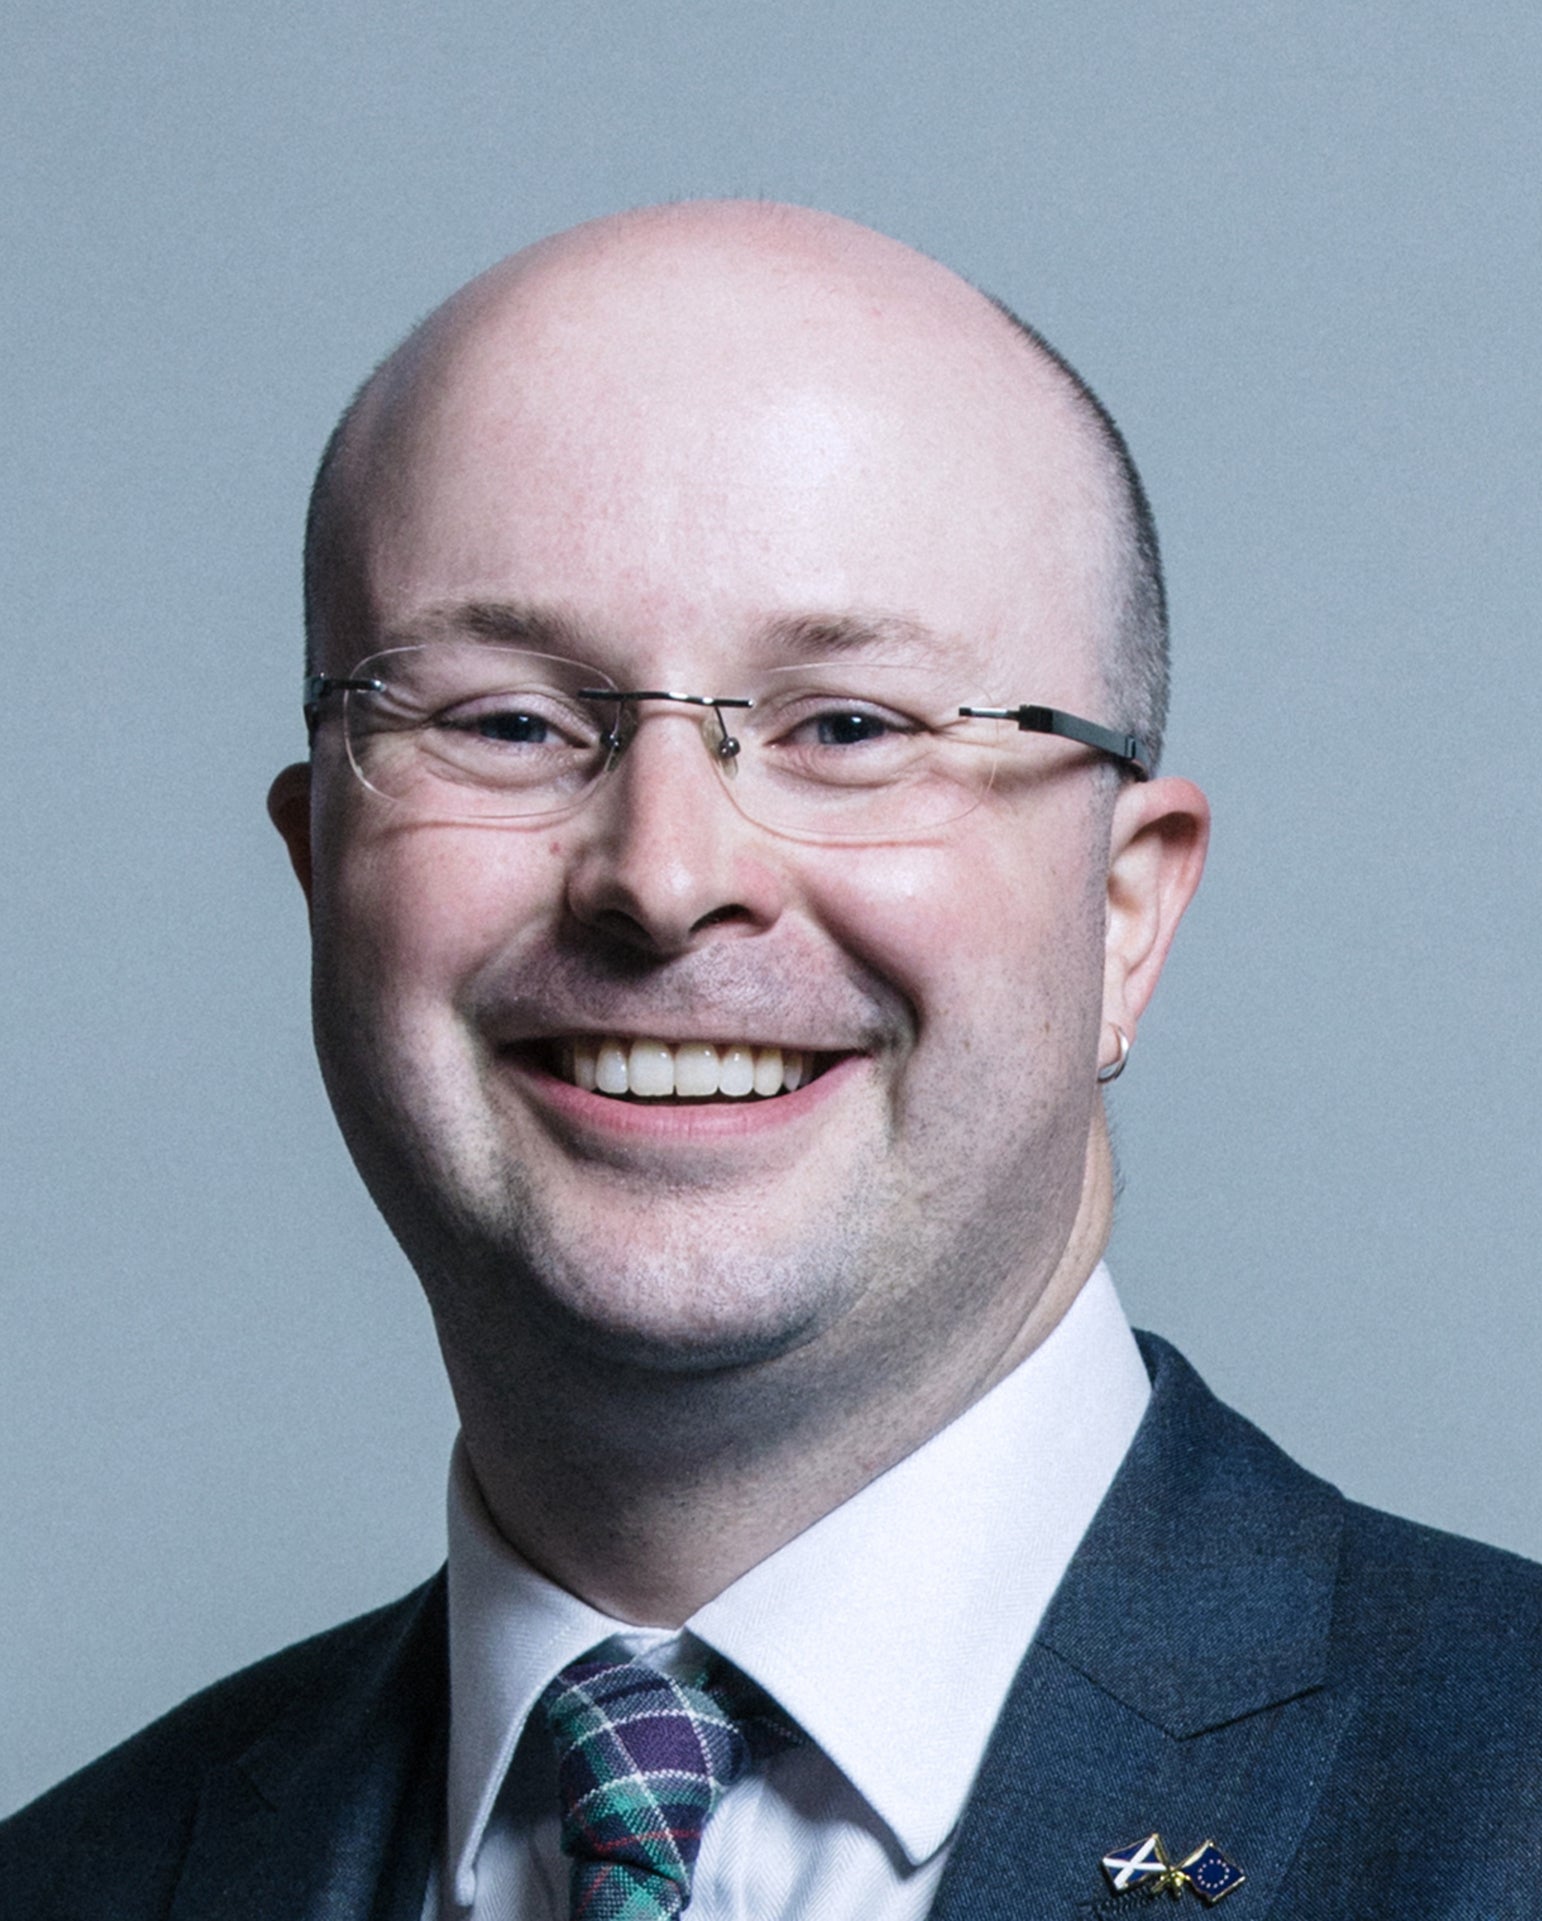 The police will not proceed with an investigation against Glasgow North MP Patrick Grady (Chris McAndrew/UK Parliament)